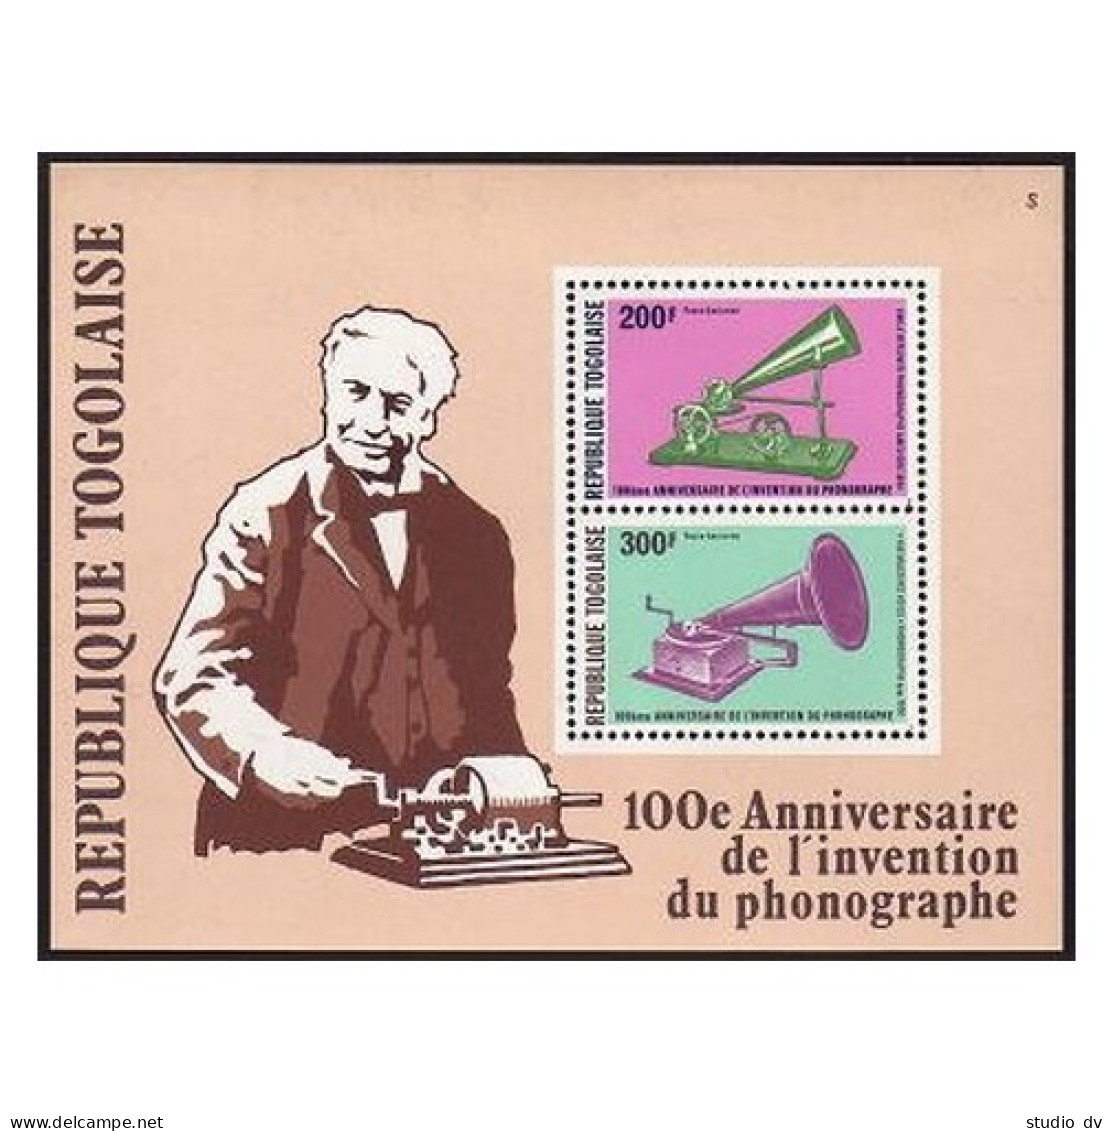 Togo C357a Sheet, MNH. Michel Bl.135. Invention Of Phonograph, By Edison, 1978. - Togo (1960-...)